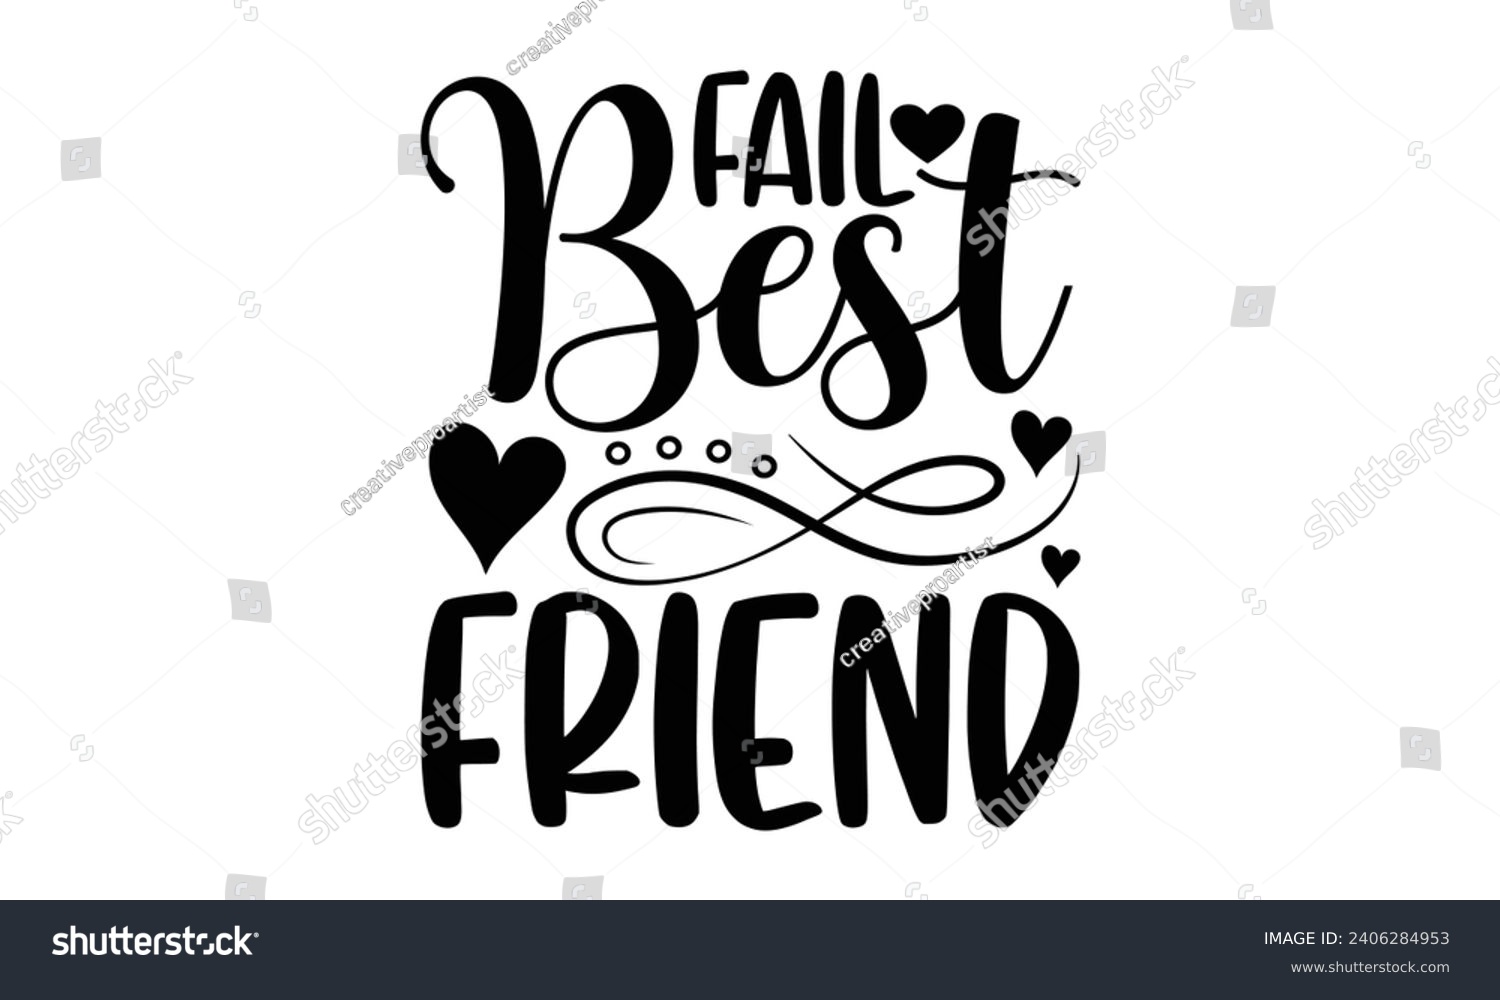 SVG of Fail Best Friend- Best friends t- shirt design, Hand drawn lettering phrase, Illustration for prints on bags, posters, cards eps, Files for Cutting, Isolated on white background. svg